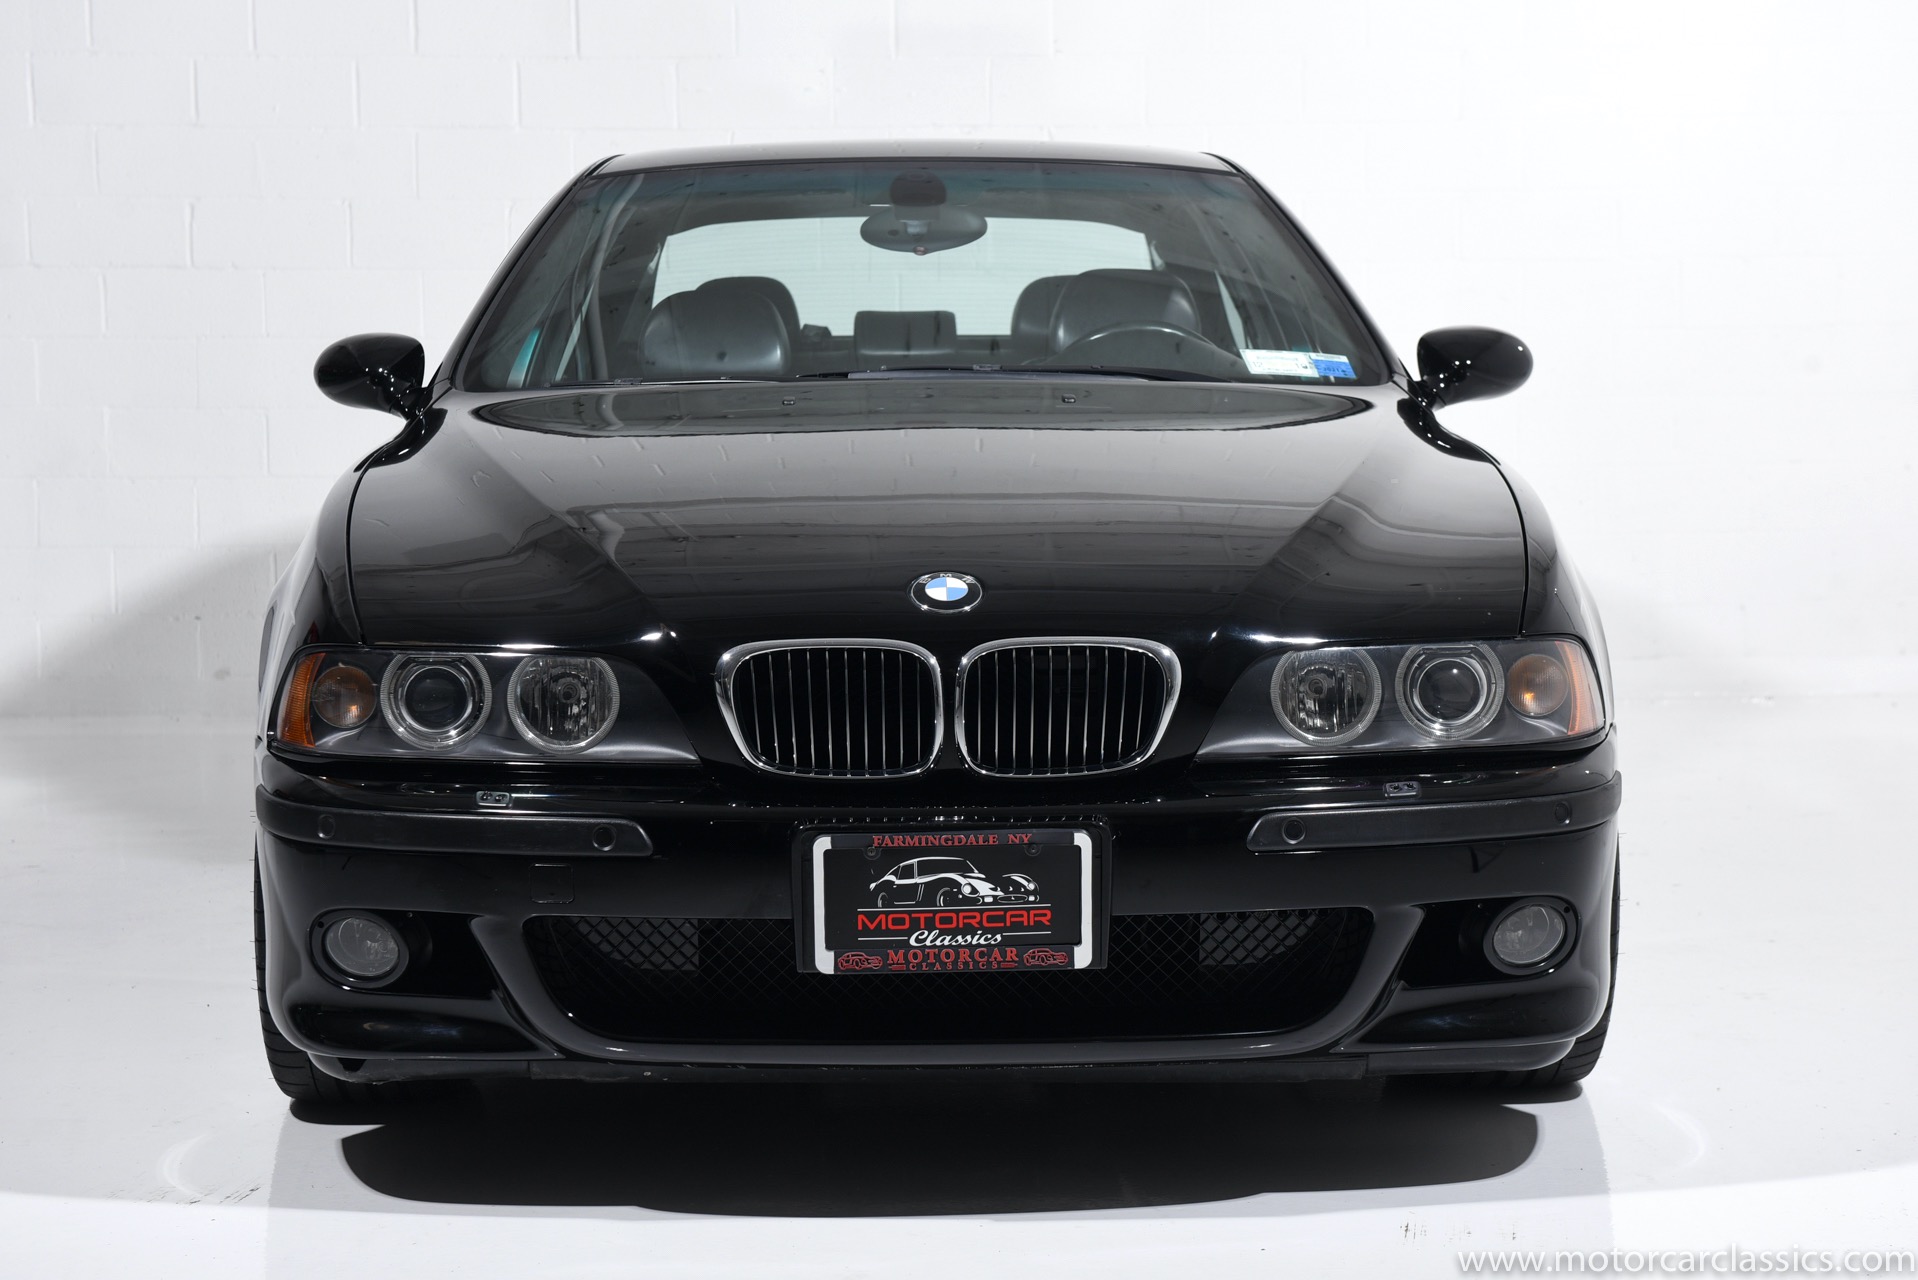 Used 2002 Bmw M5's nationwide for sale - MotorCloud